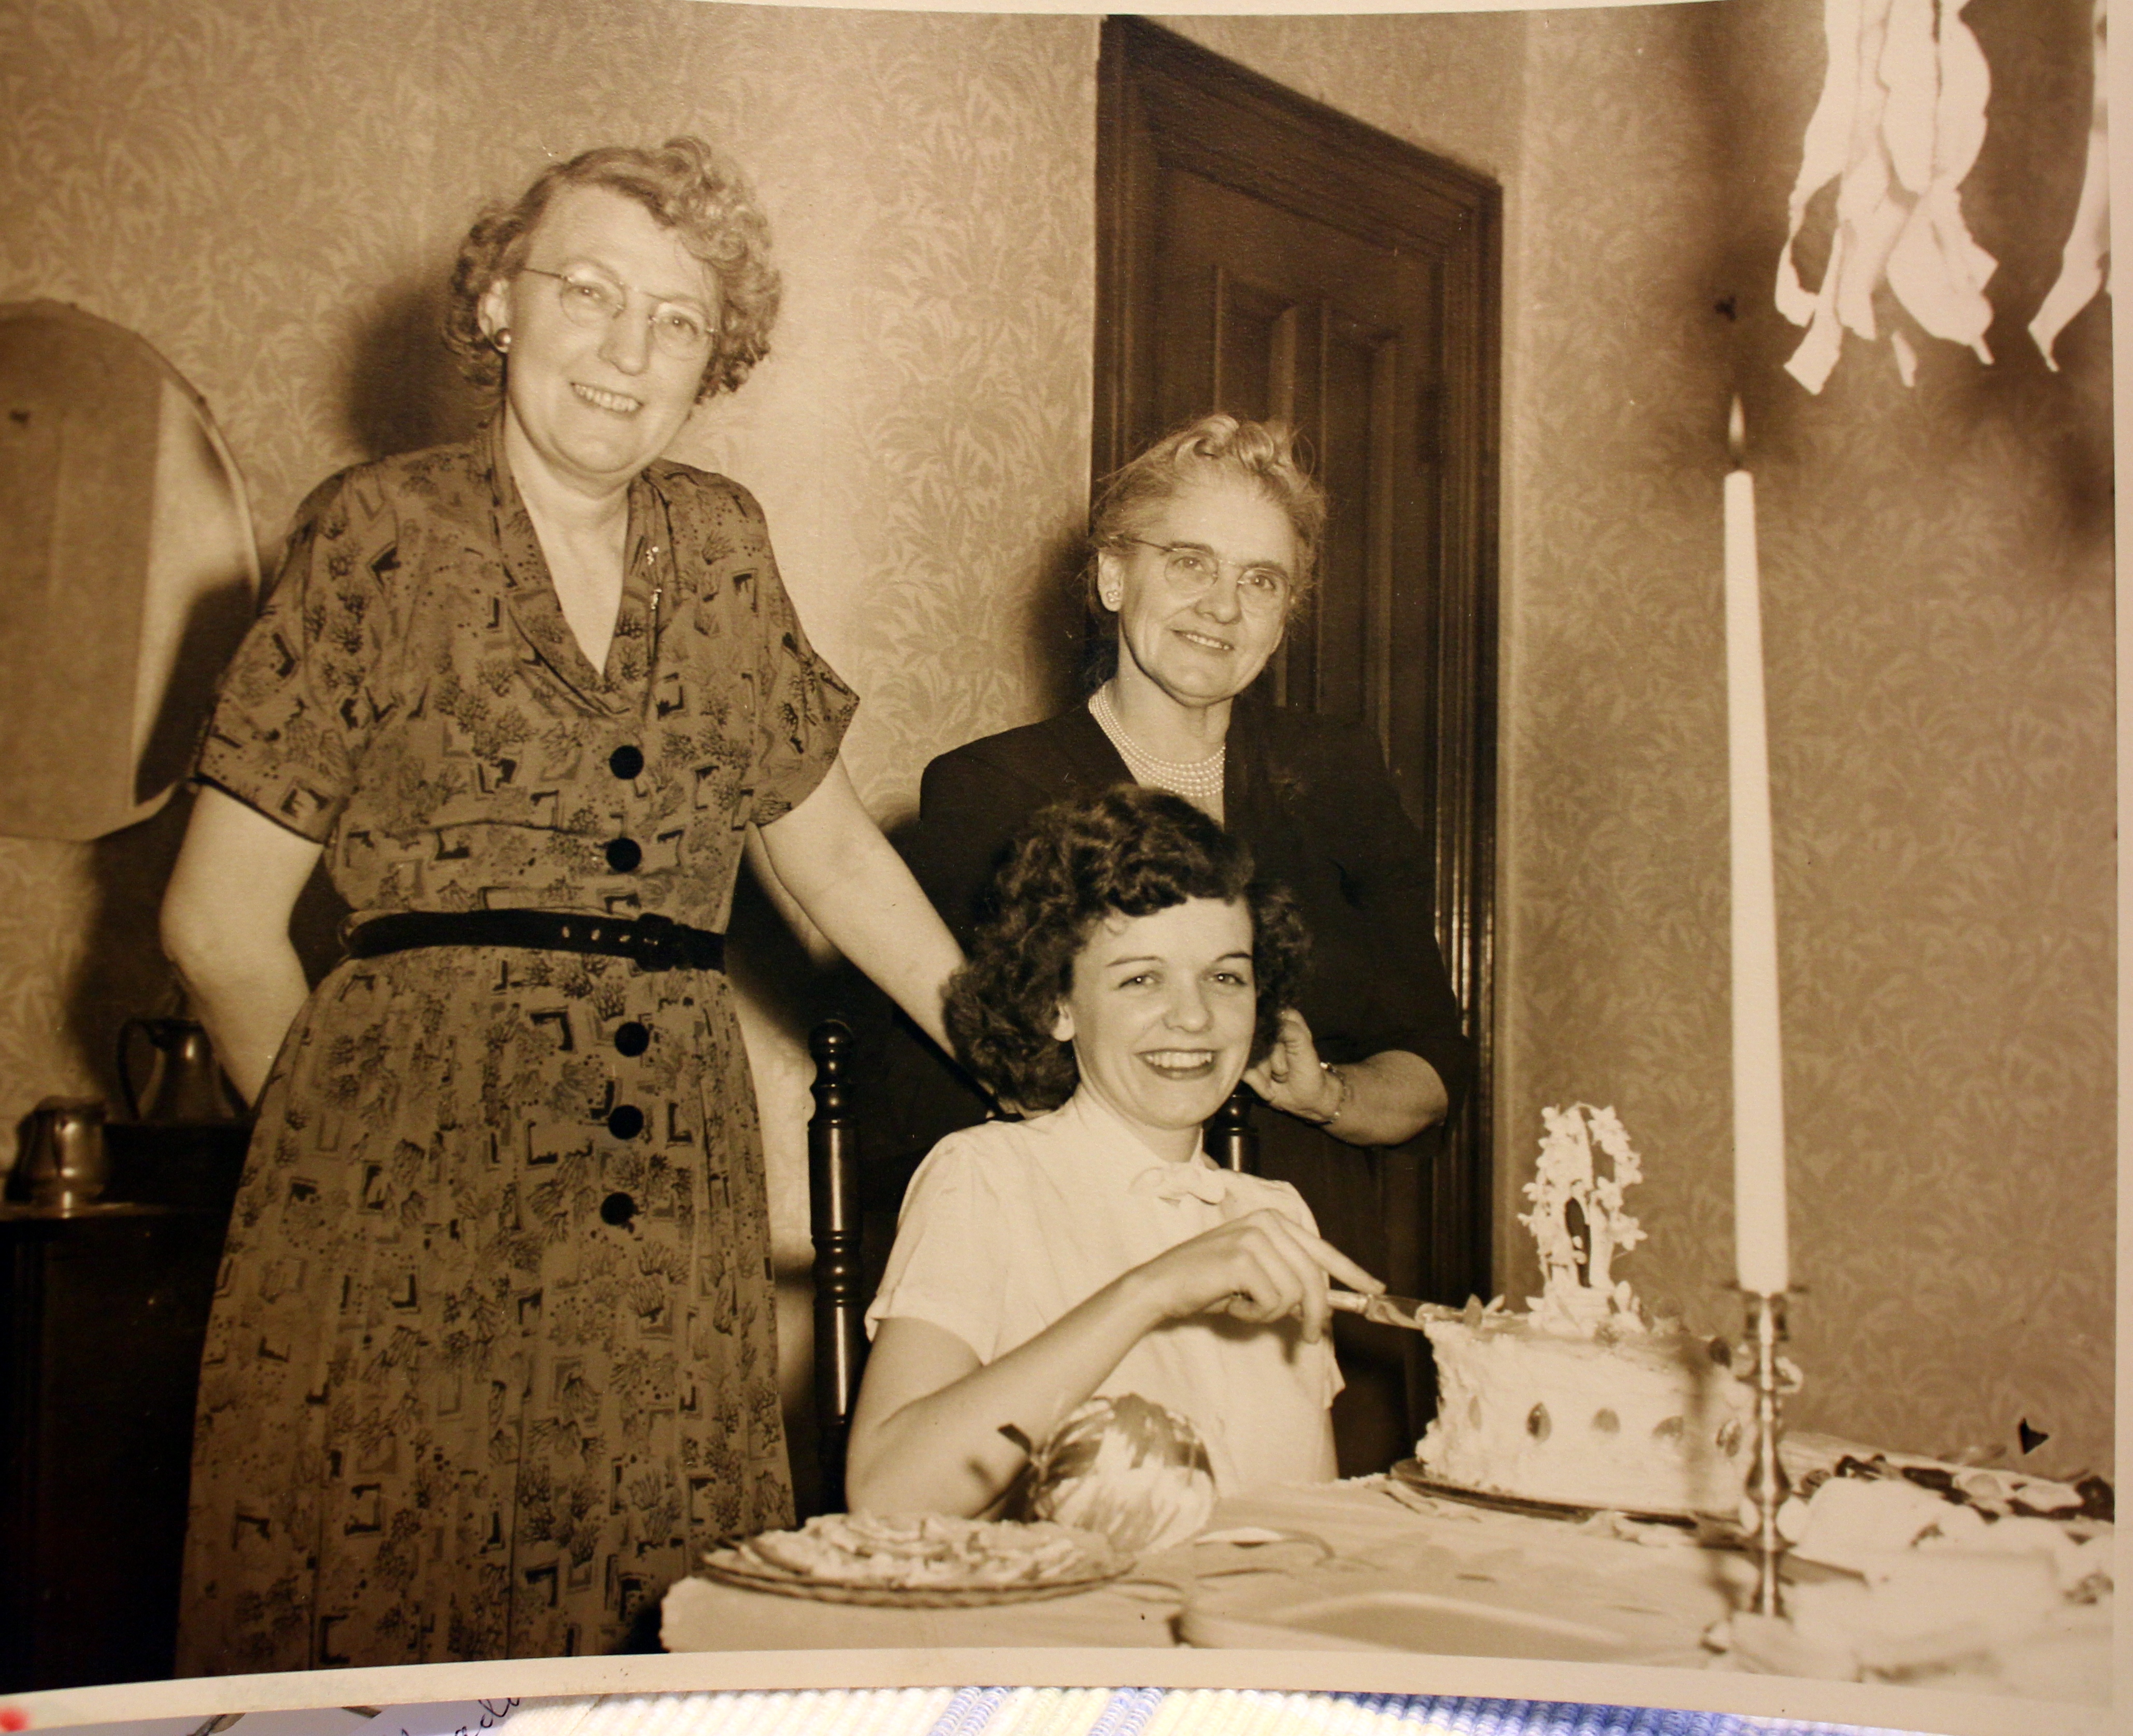 02.1951 Harriet, Claire & Mabel at Mom's Wedding Shower with my grandmothers.jpg